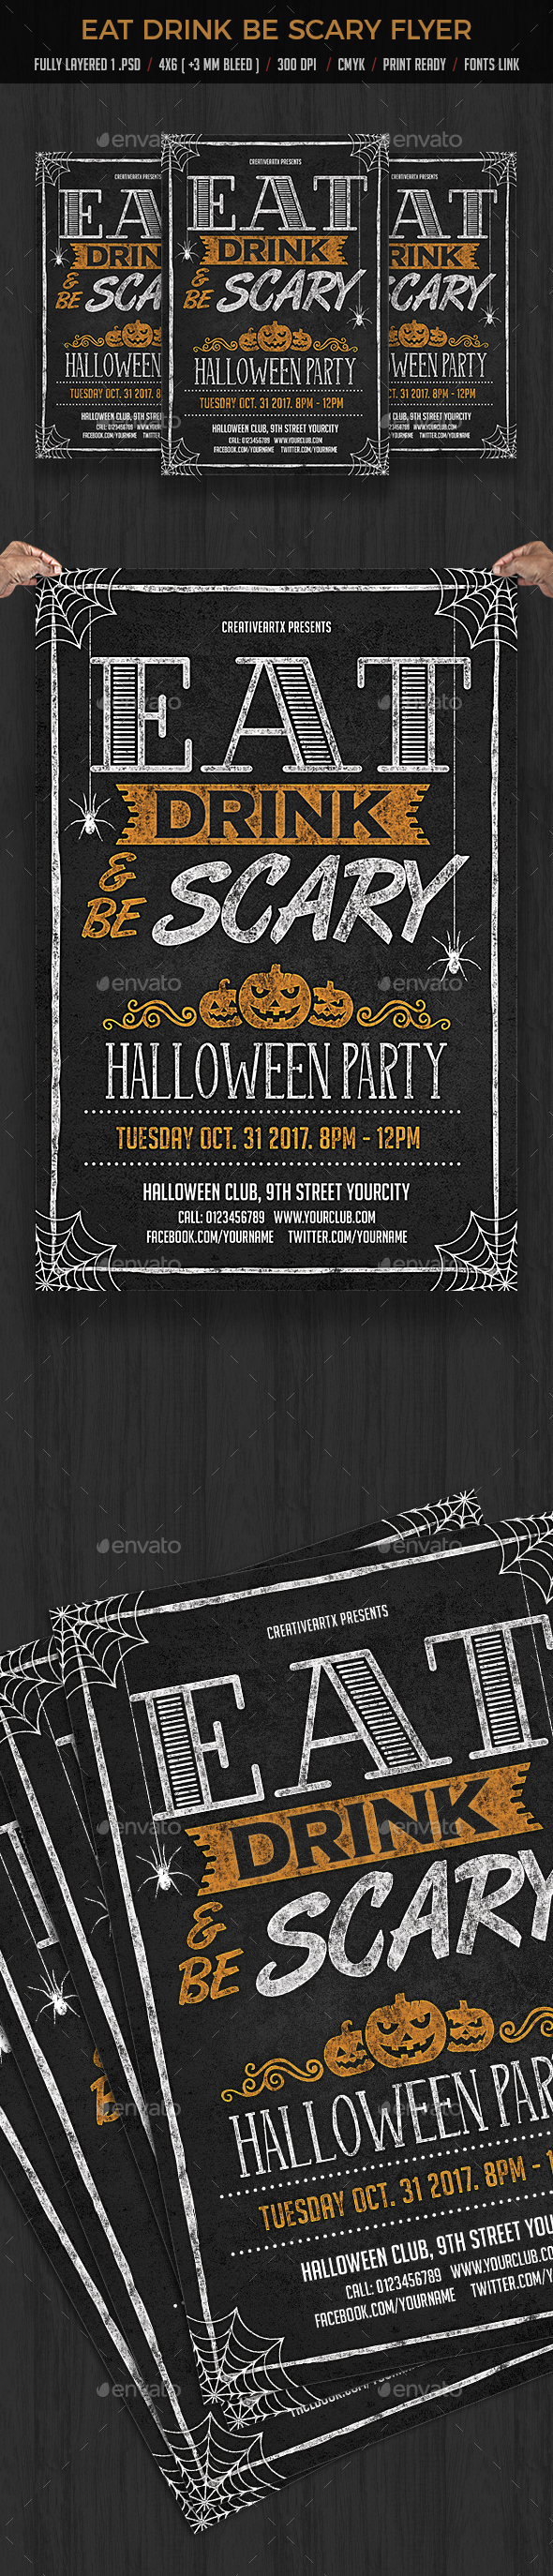 Eat Drink Be Scary Halloween Flyer